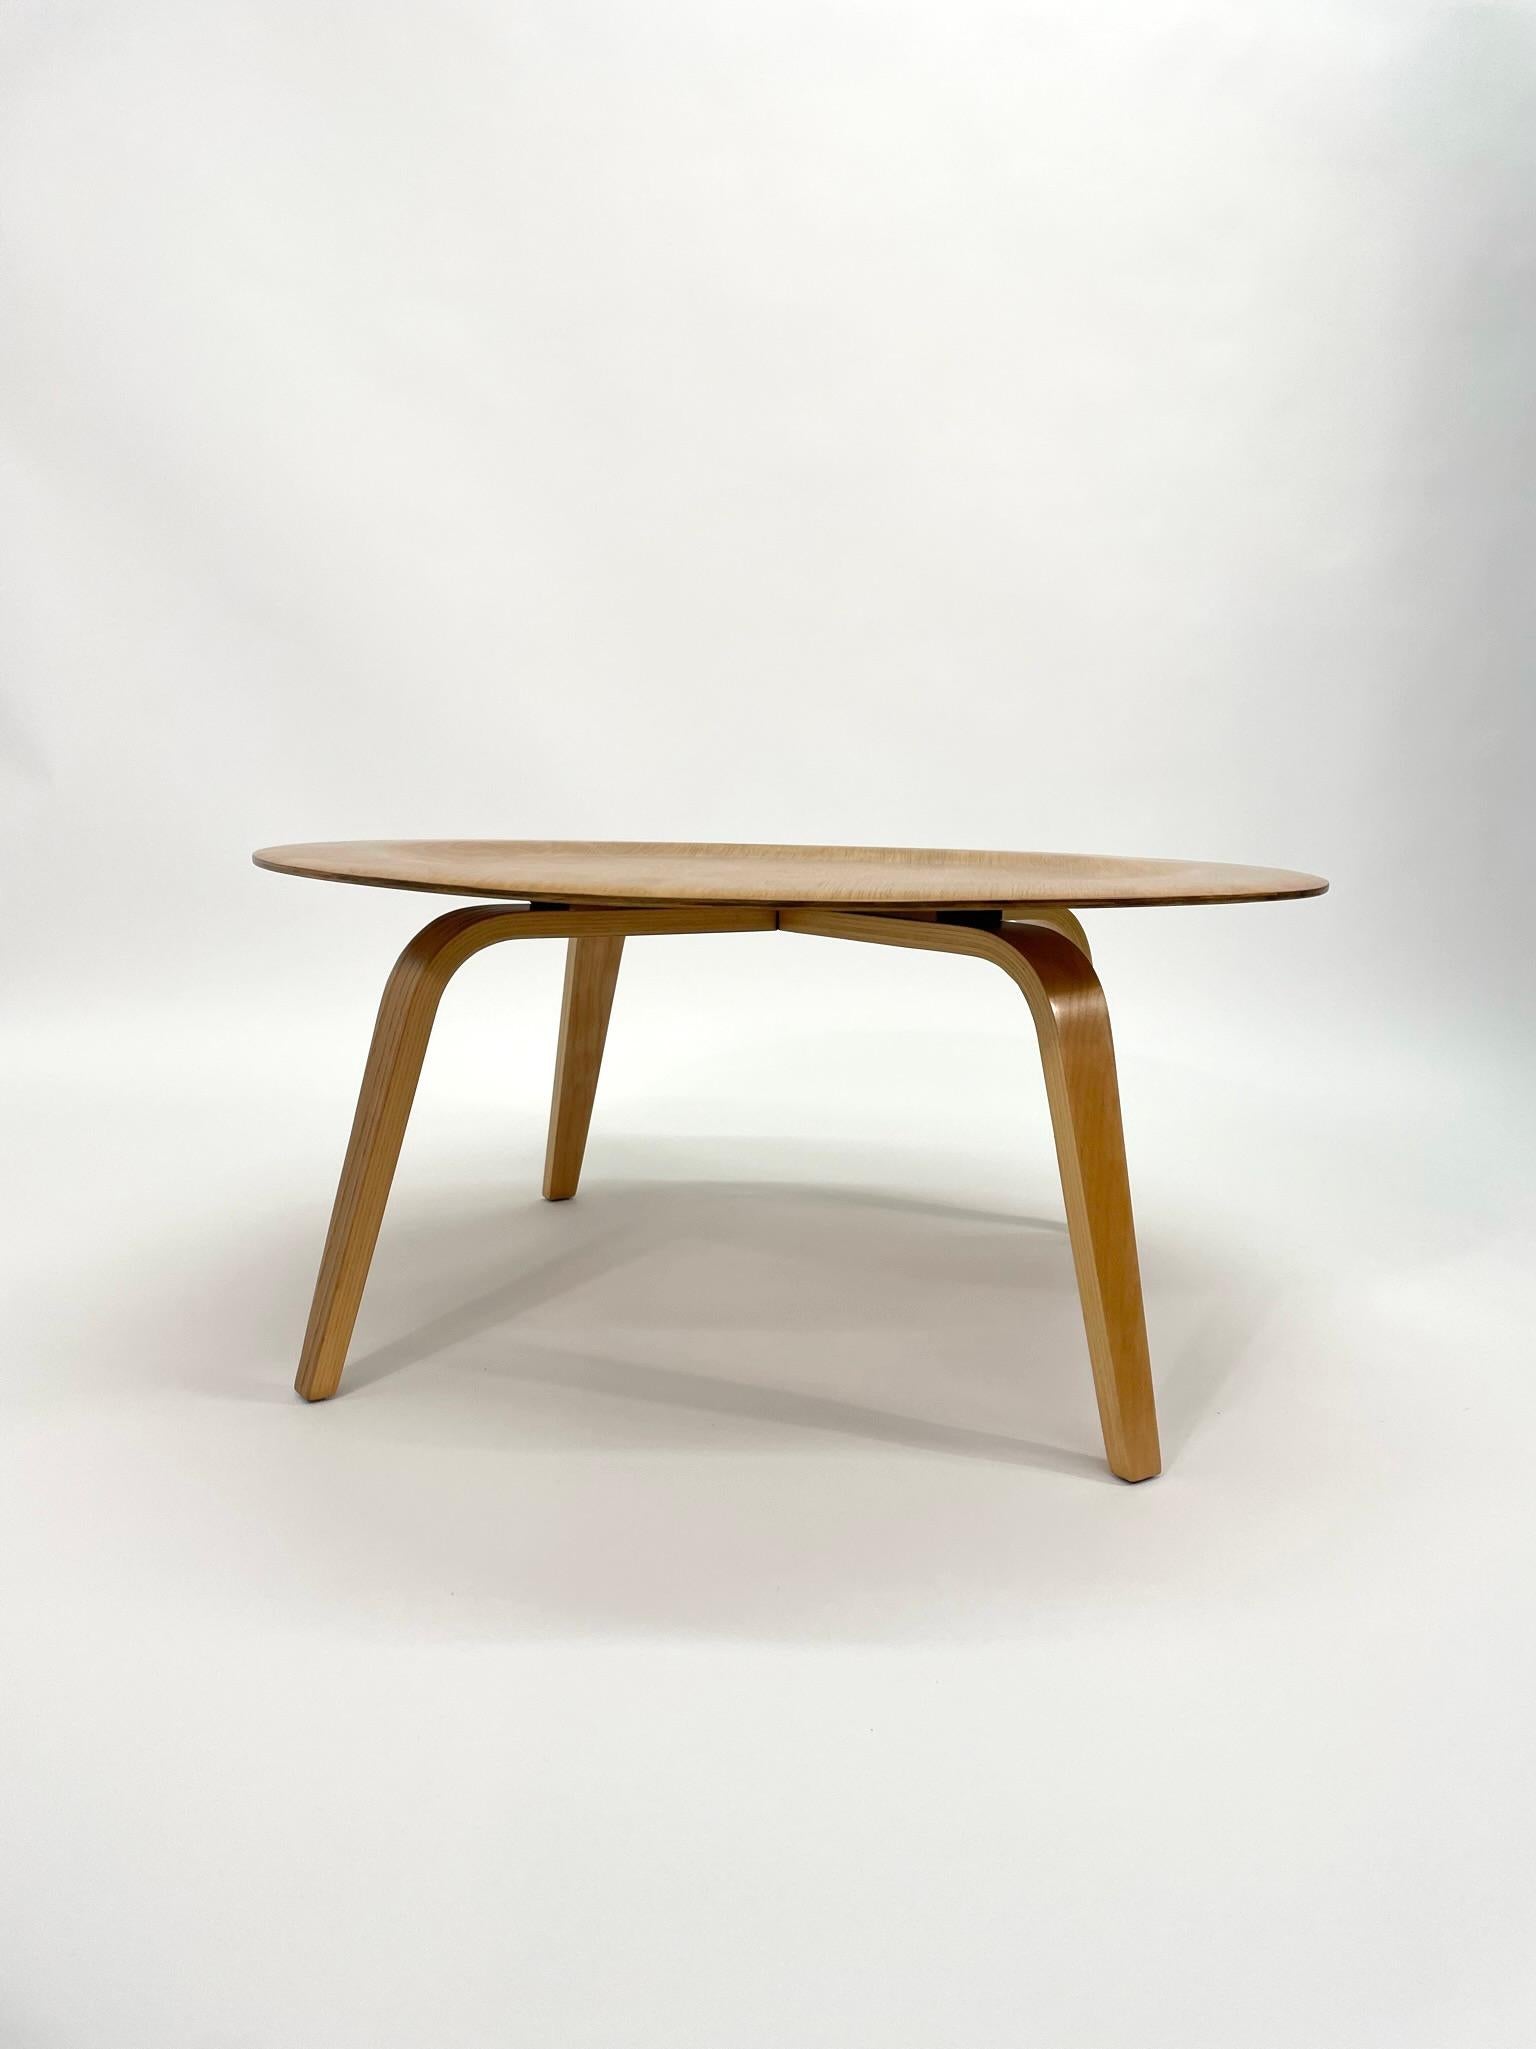 This 3rd Generation Eames CTW Coffee Table for Herman Miller was made in 1950. This table consists of a circular five-layer plywood top, sitting upon four matching legs of bent plywood to a near 90 degrees. CTW was the abbreviated name of the Coffee